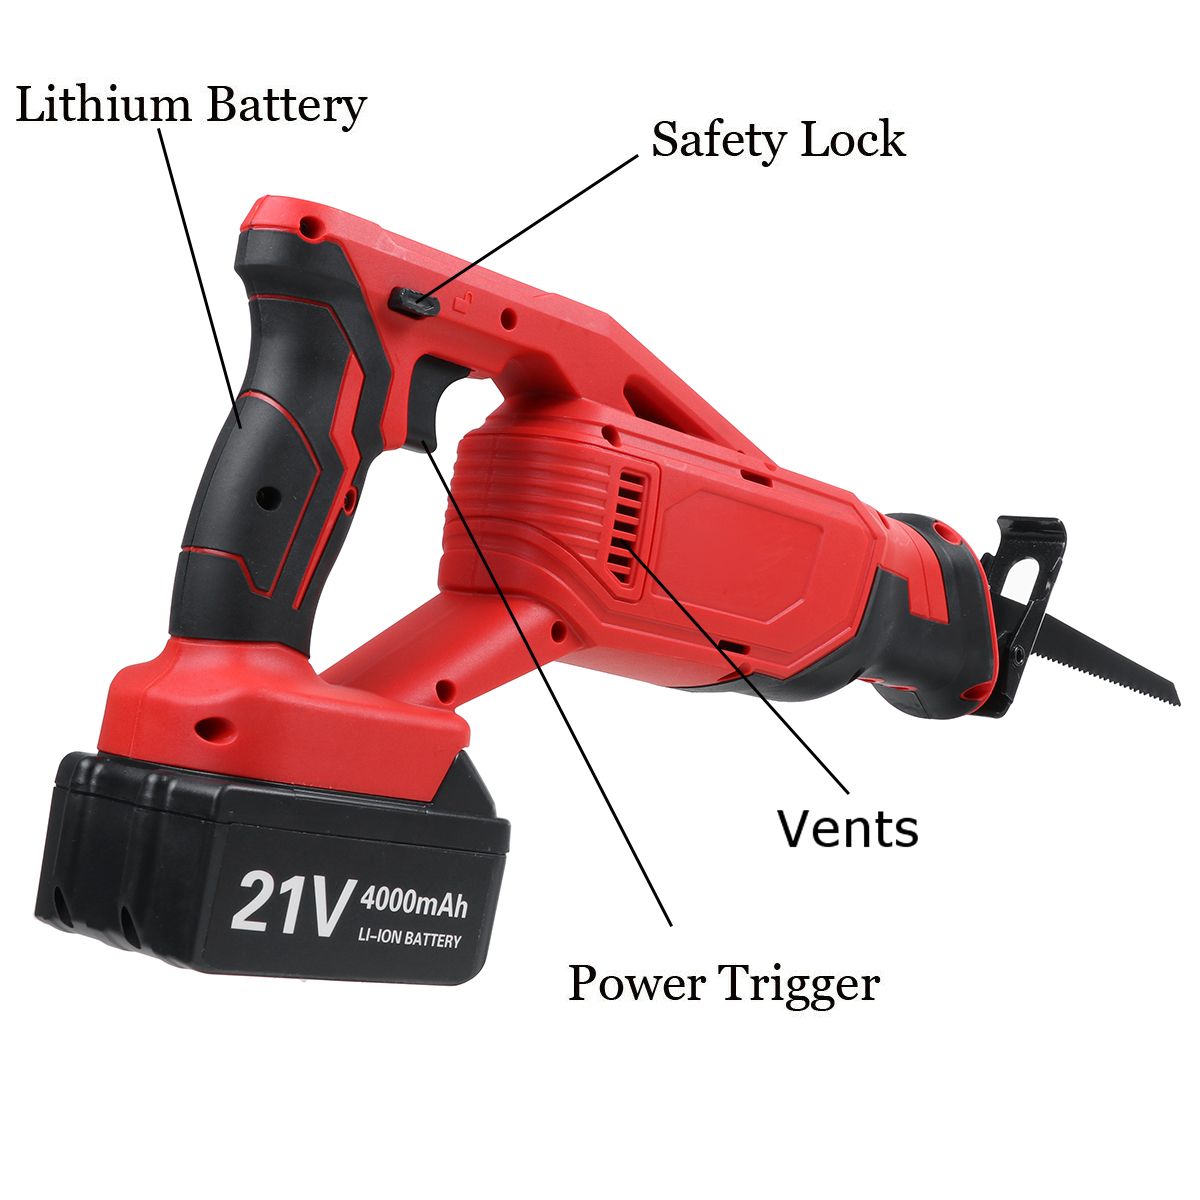 4000mAh-Cordless-Electric-Reciprocating-Saw-Wood-Cutting-Rechargeable-Power-Tool-1725276